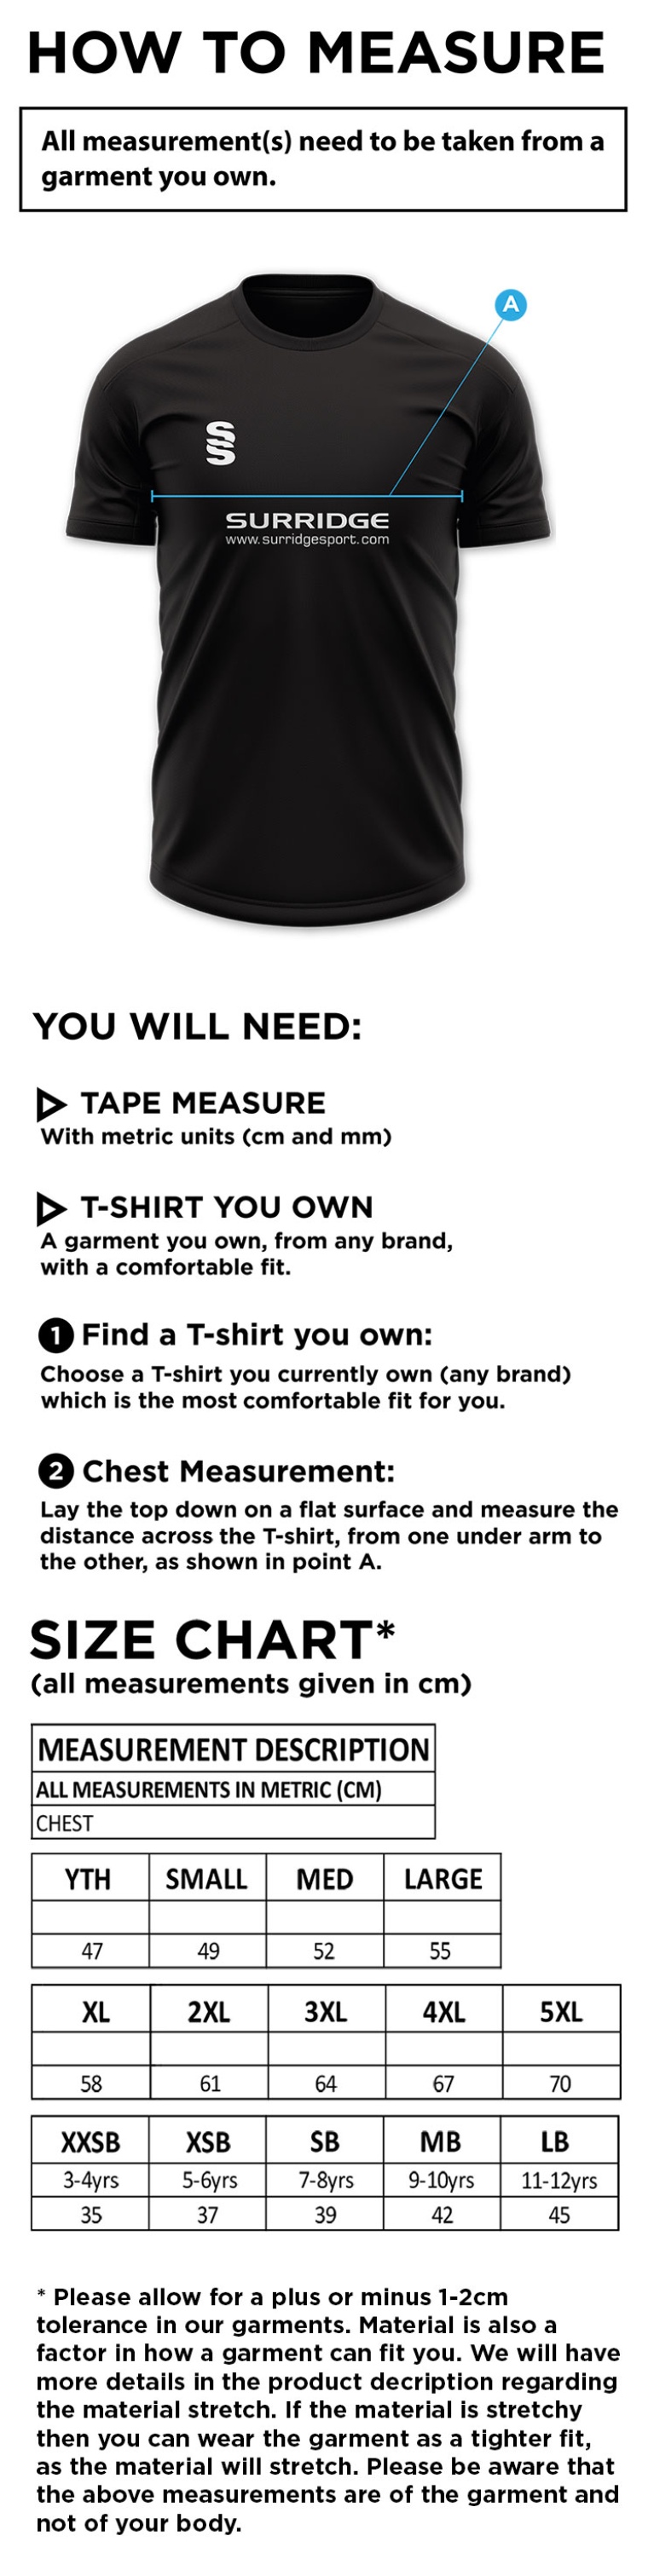 Youth's Camo Games Shirt : Royal - Size Guide